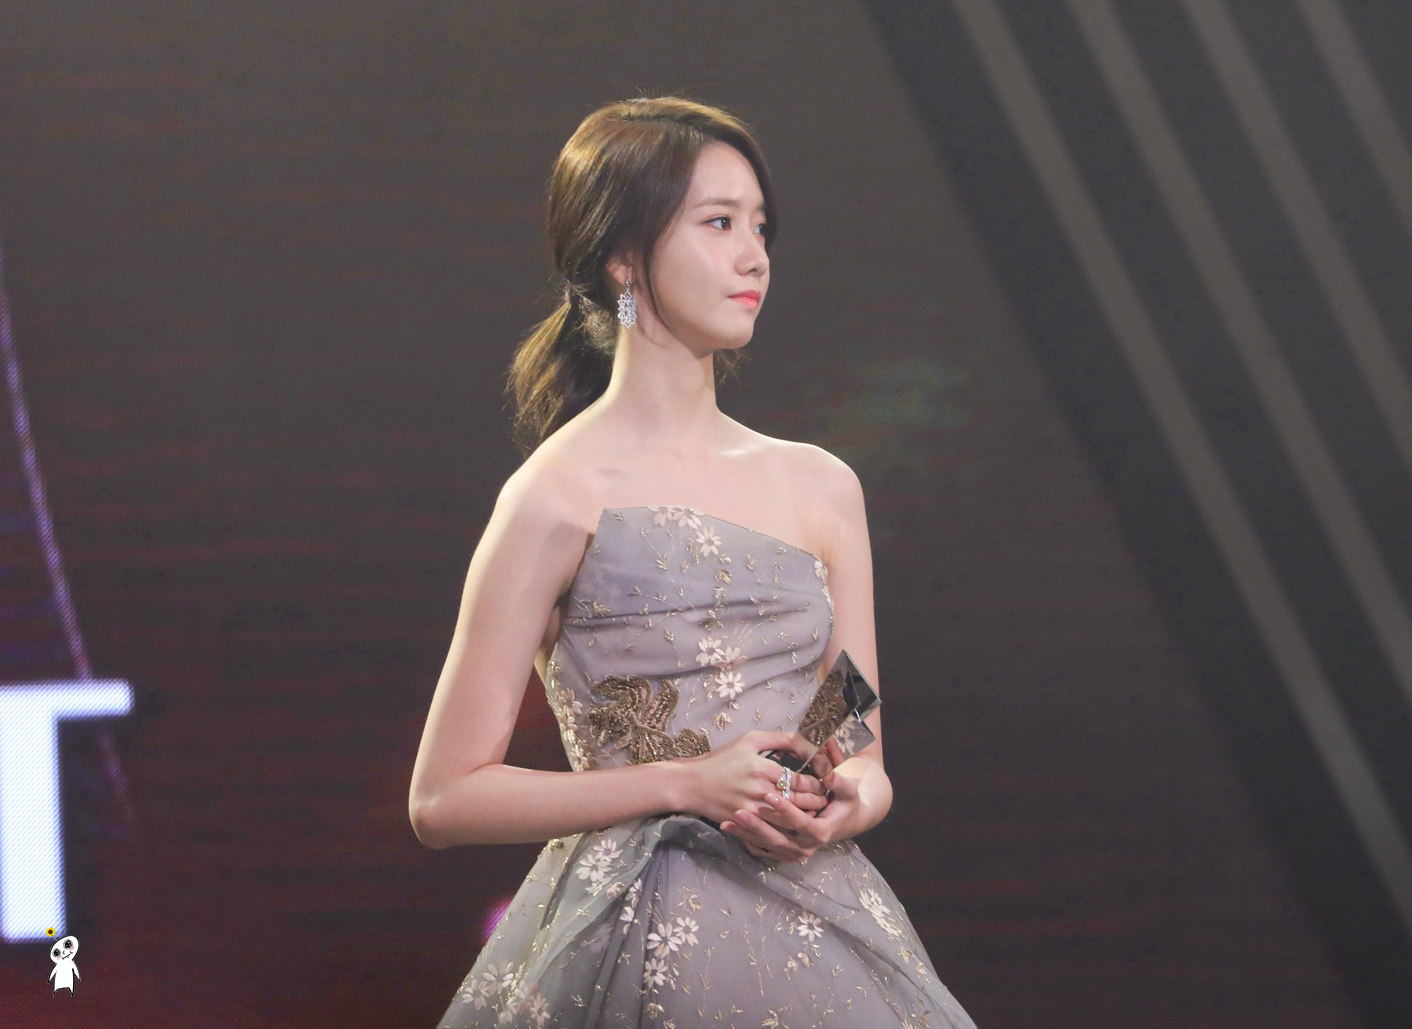 [PIC][16-11-2016]YoonA tham dự "'2016 Asia Artist Awards (AAA)" tại "Kyung Hee University Grand Peace Palace" vào tối nay - Page 4 271BF5505837F6F433EE45